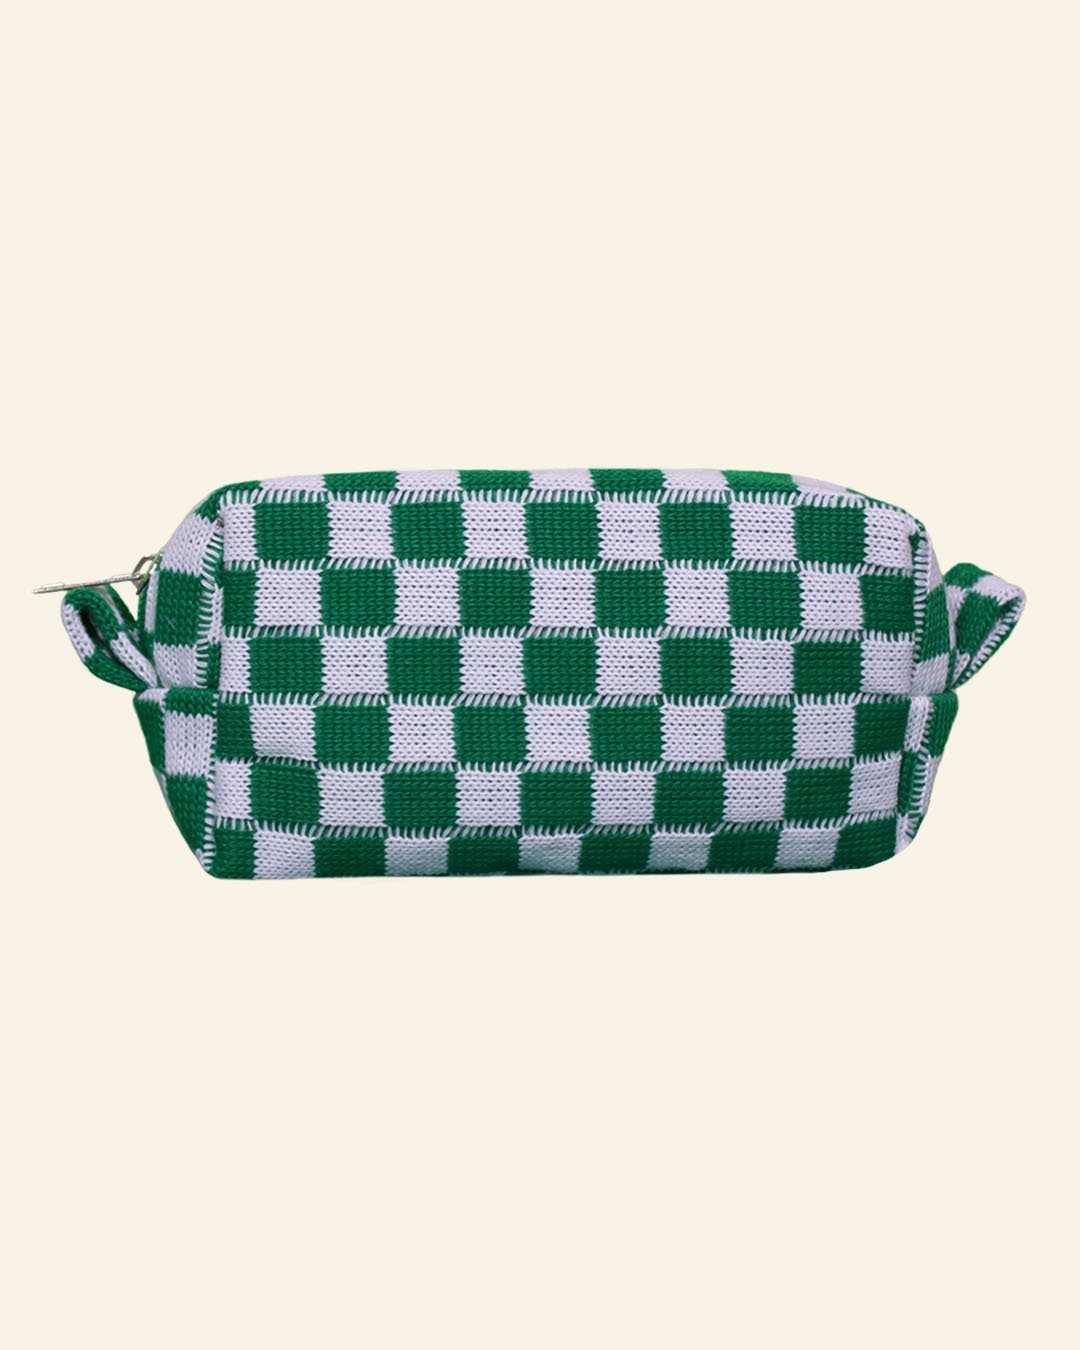 Clarence & Co. Green and White Checked Pouch